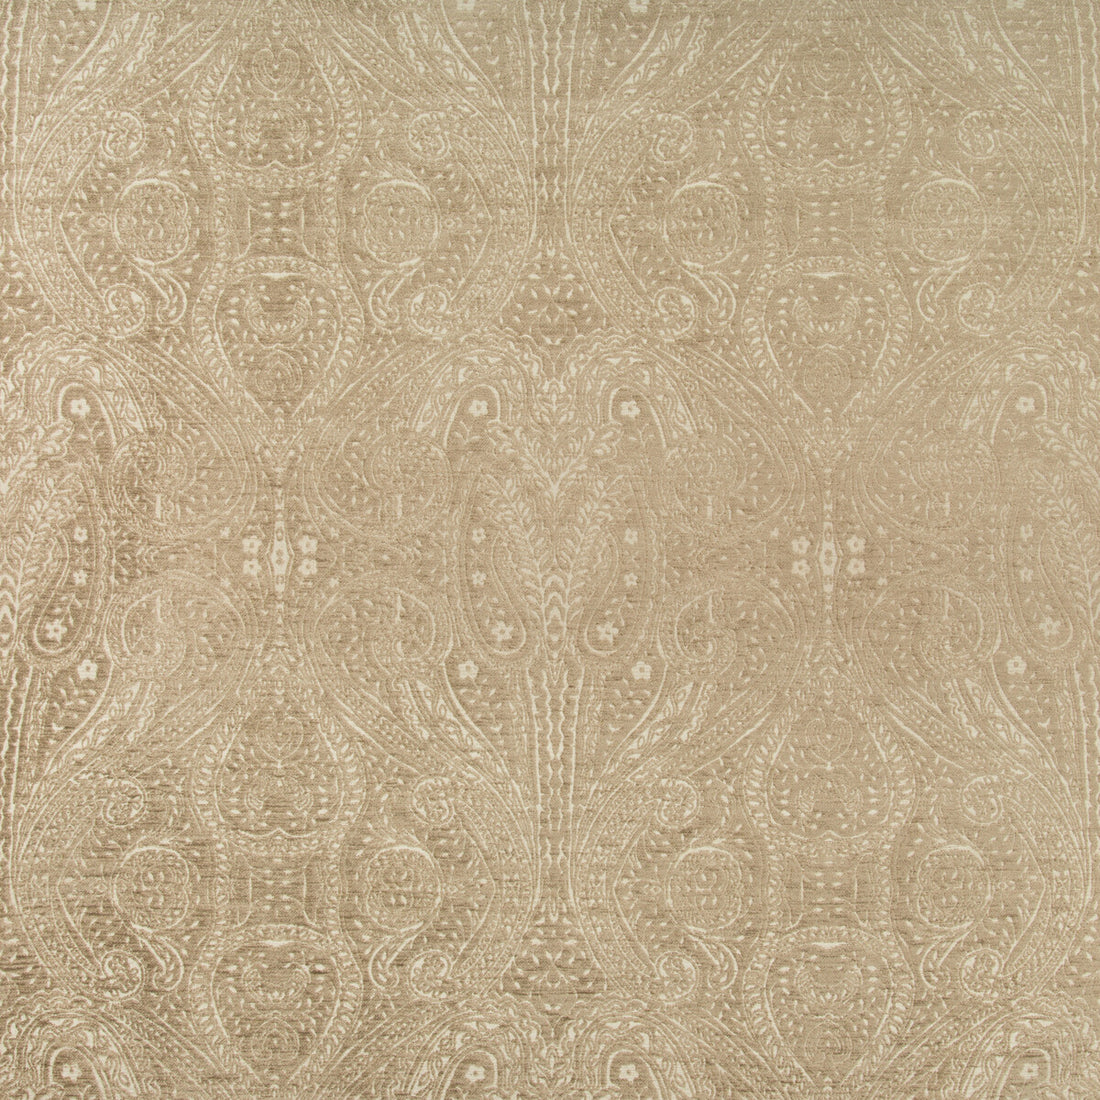 Kravet Design fabric in 35007-1616 color - pattern 35007.1616.0 - by Kravet Design in the Performance Crypton Home collection